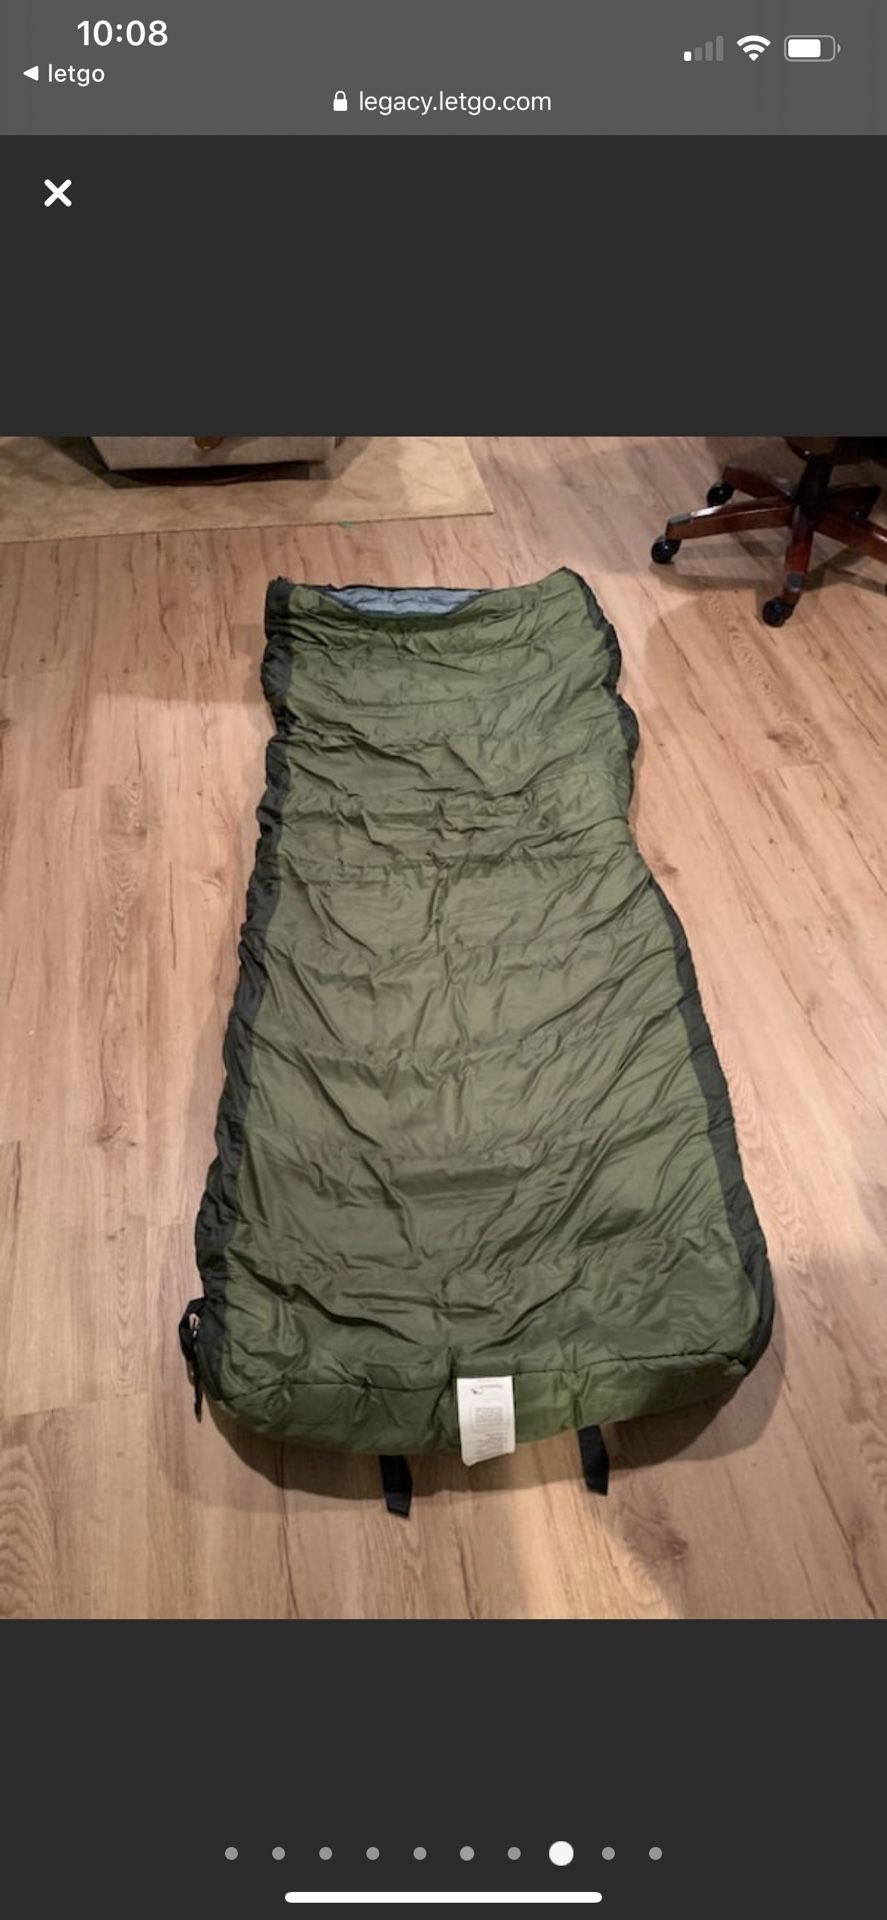 L.L. Bean Adult Sleeping Bag Long Rectangular (80" x 34")- Used only once in East Northport